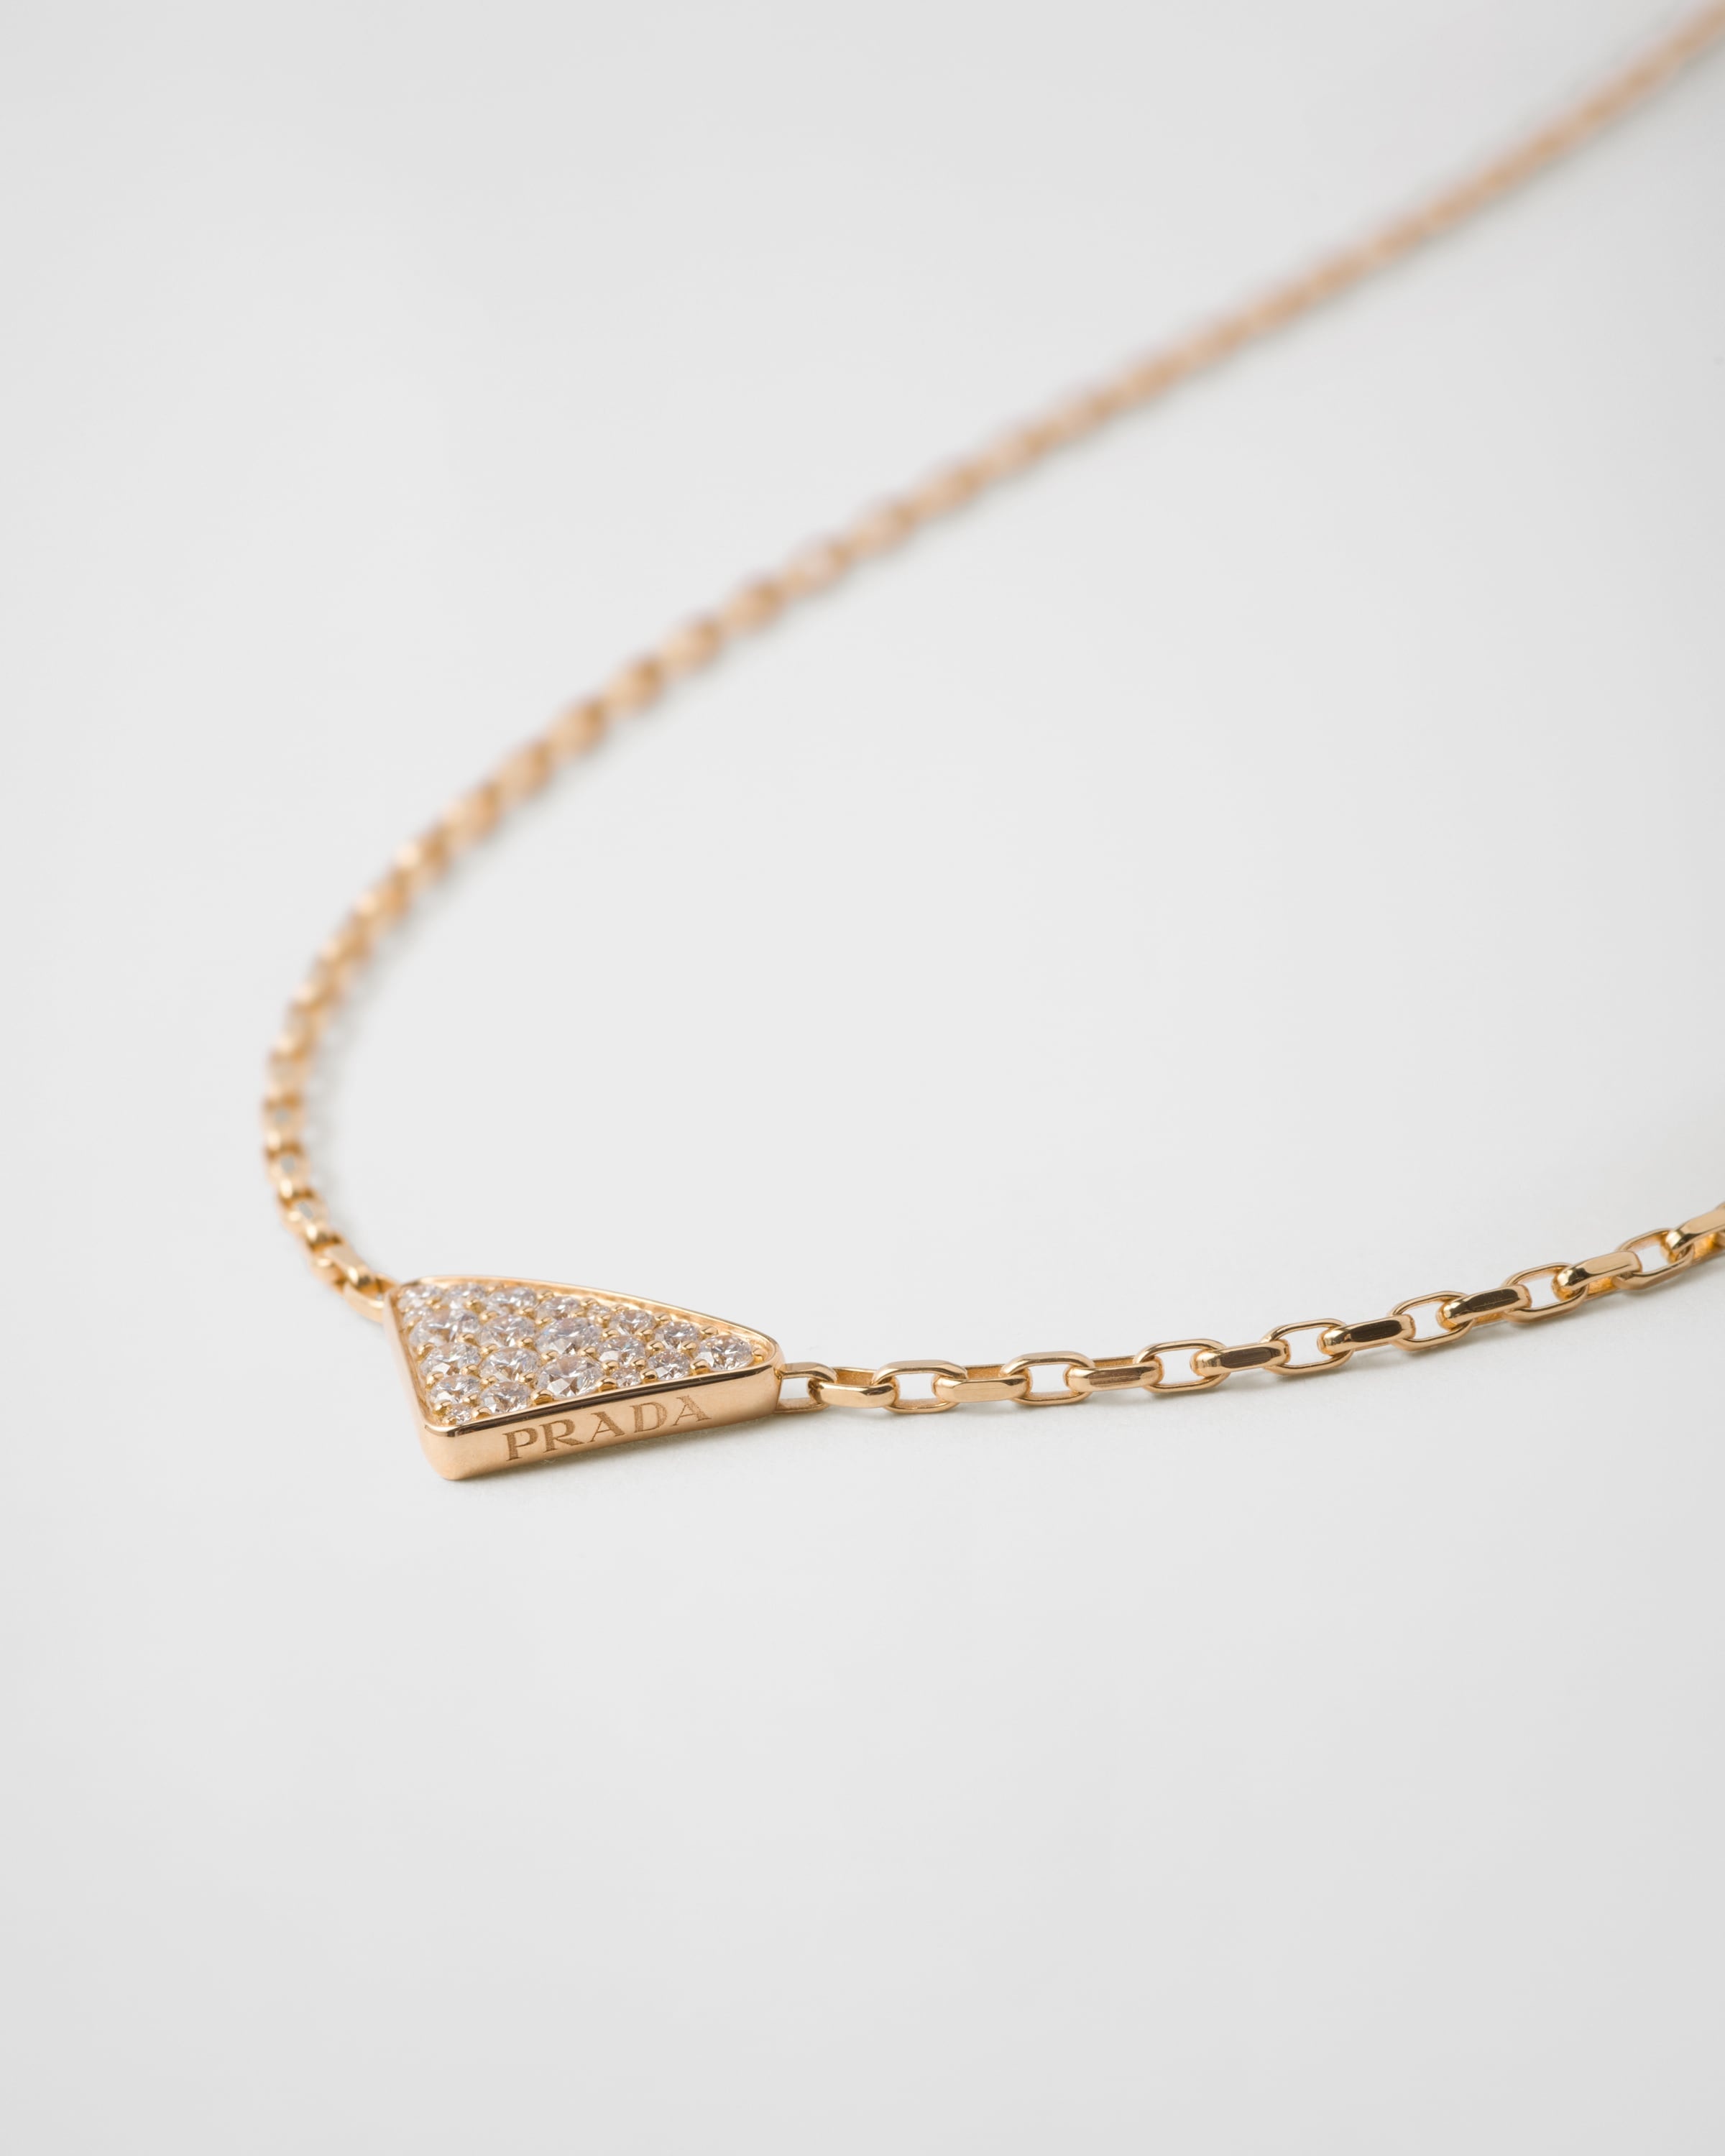 Eternal Gold Eternal mini triangle pendant necklace in yellow gold and diamonds - 3